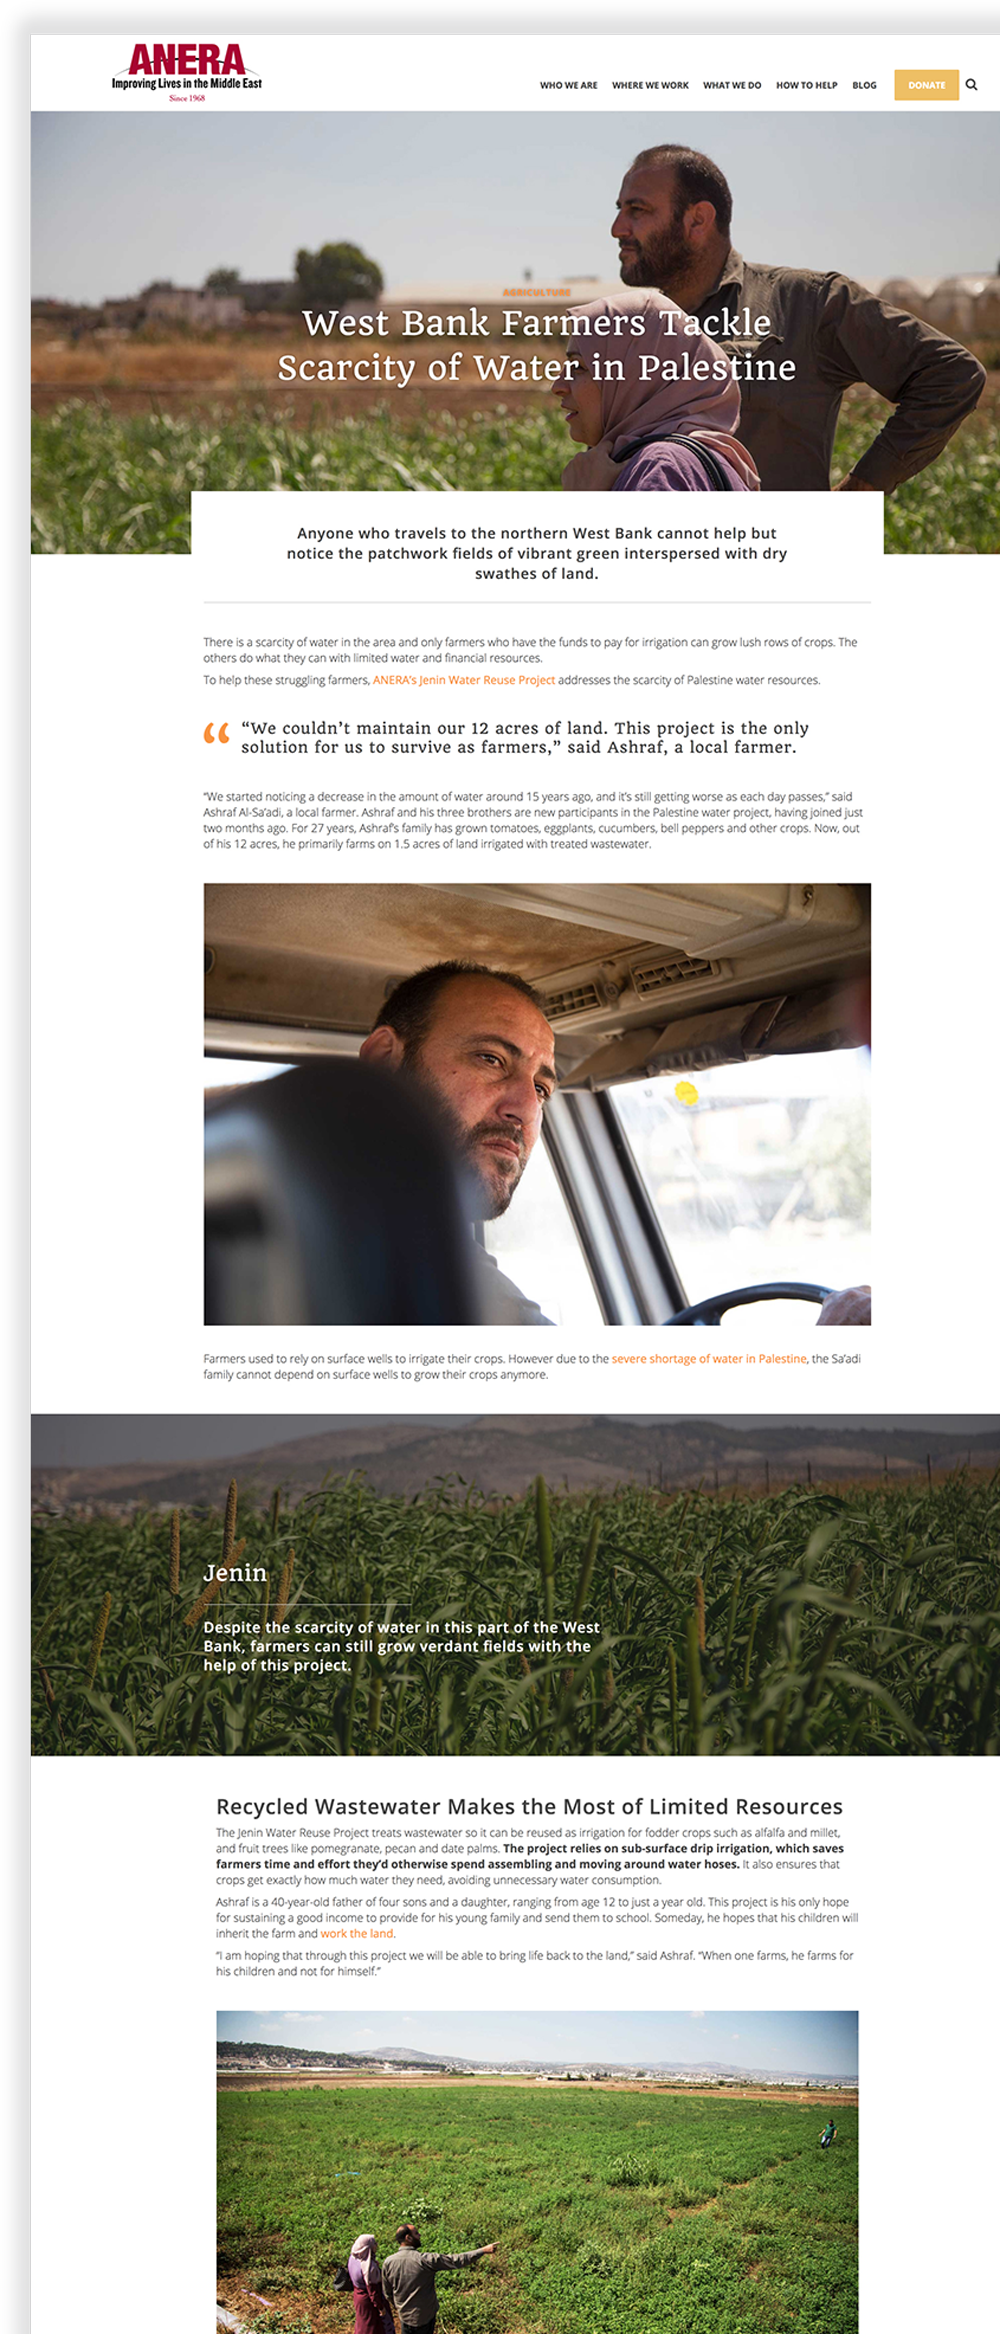 anera_story_west-bank-farmers